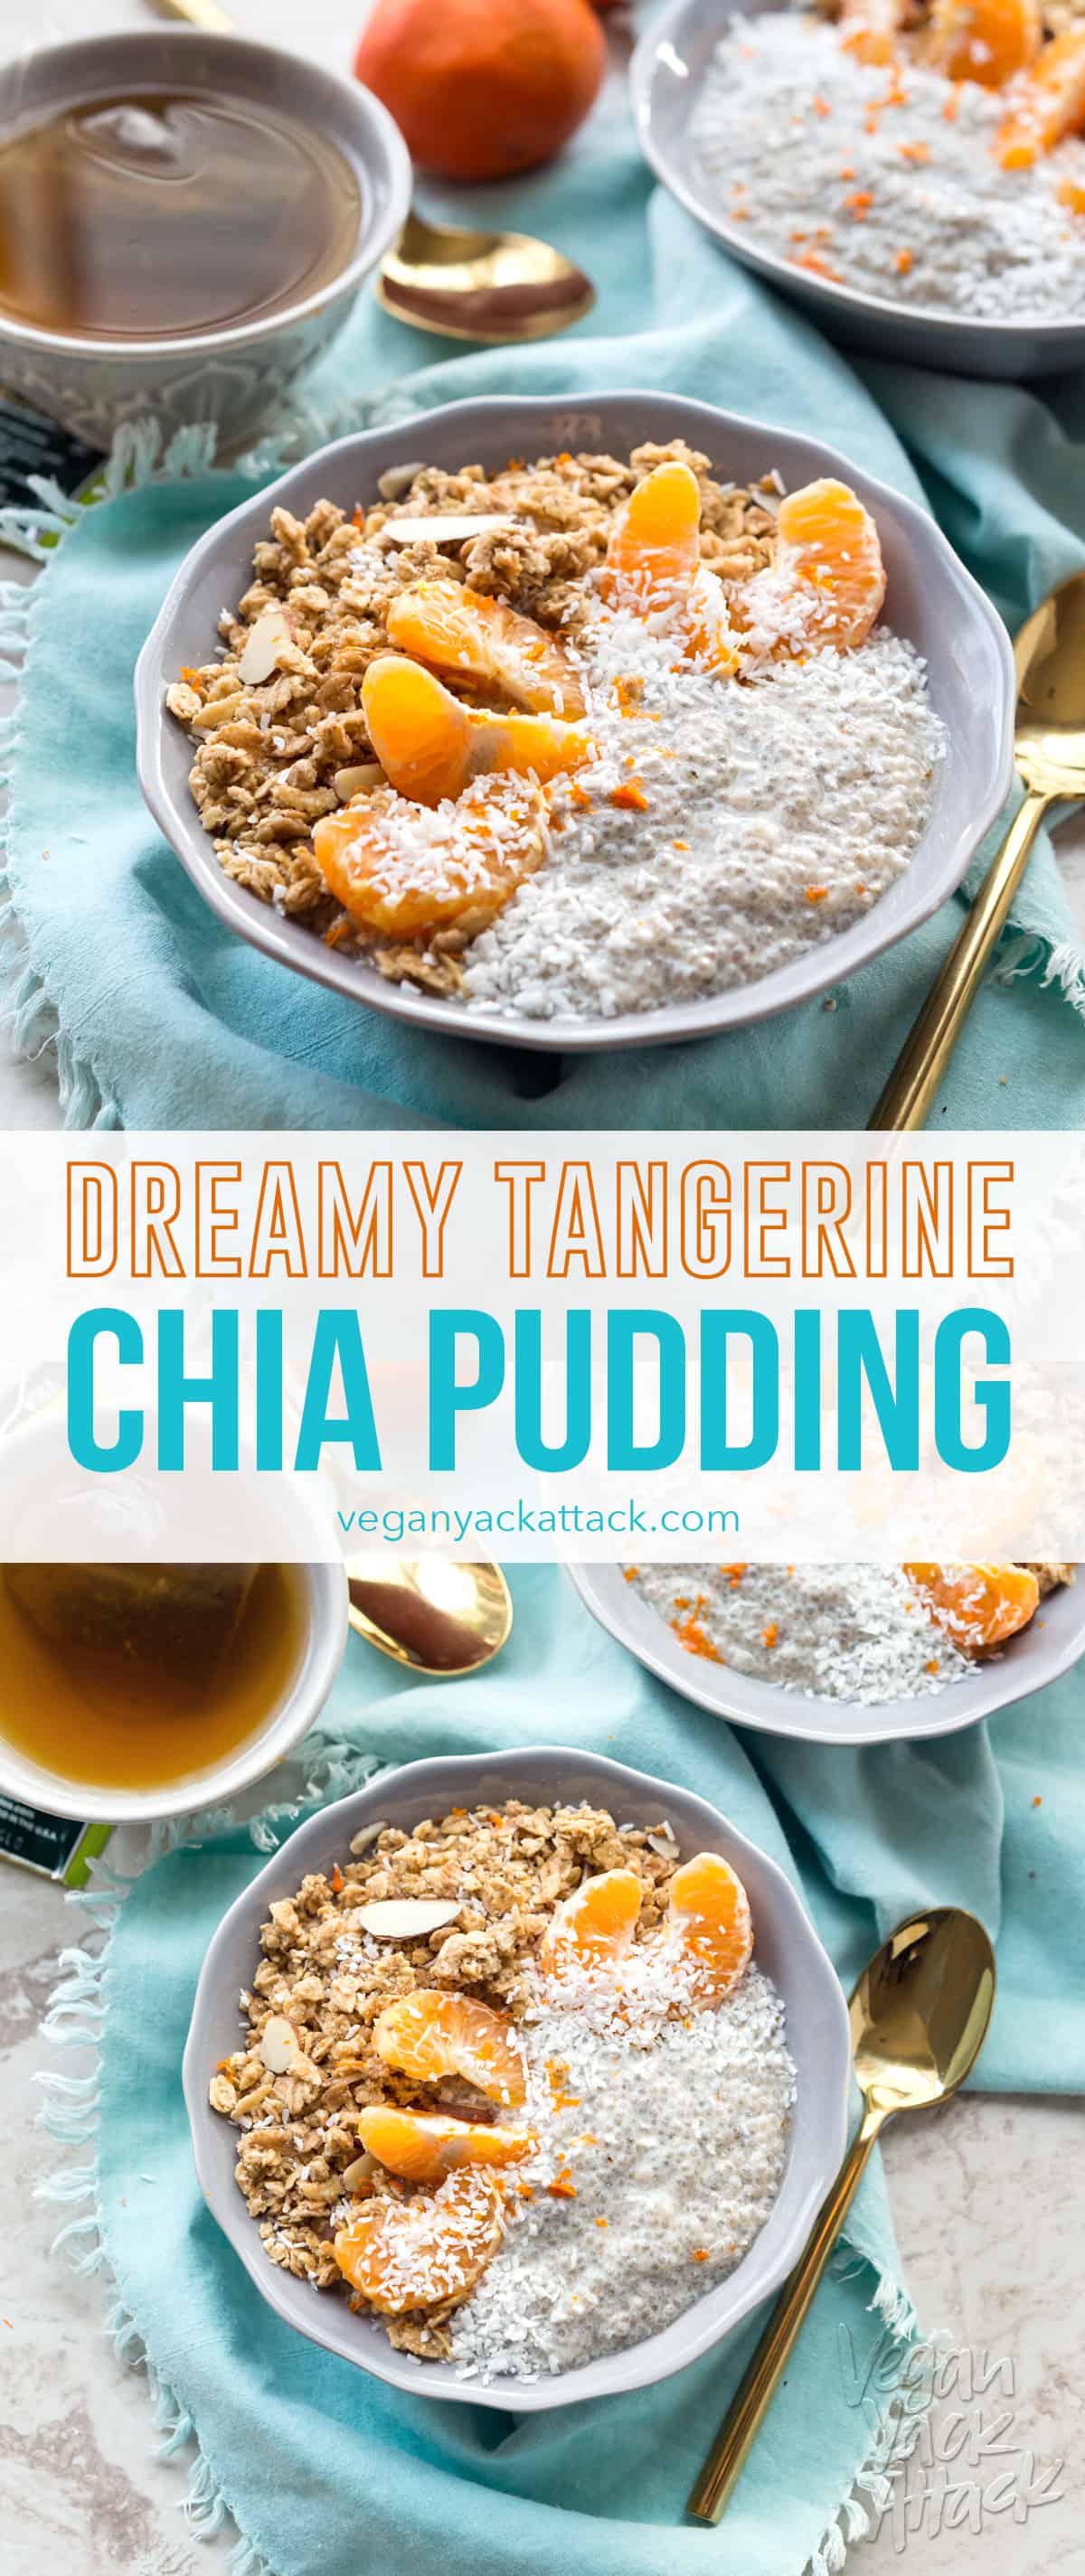 dreamy tangerine chia pudding with granola in a lilac-colored bowl with teal linen